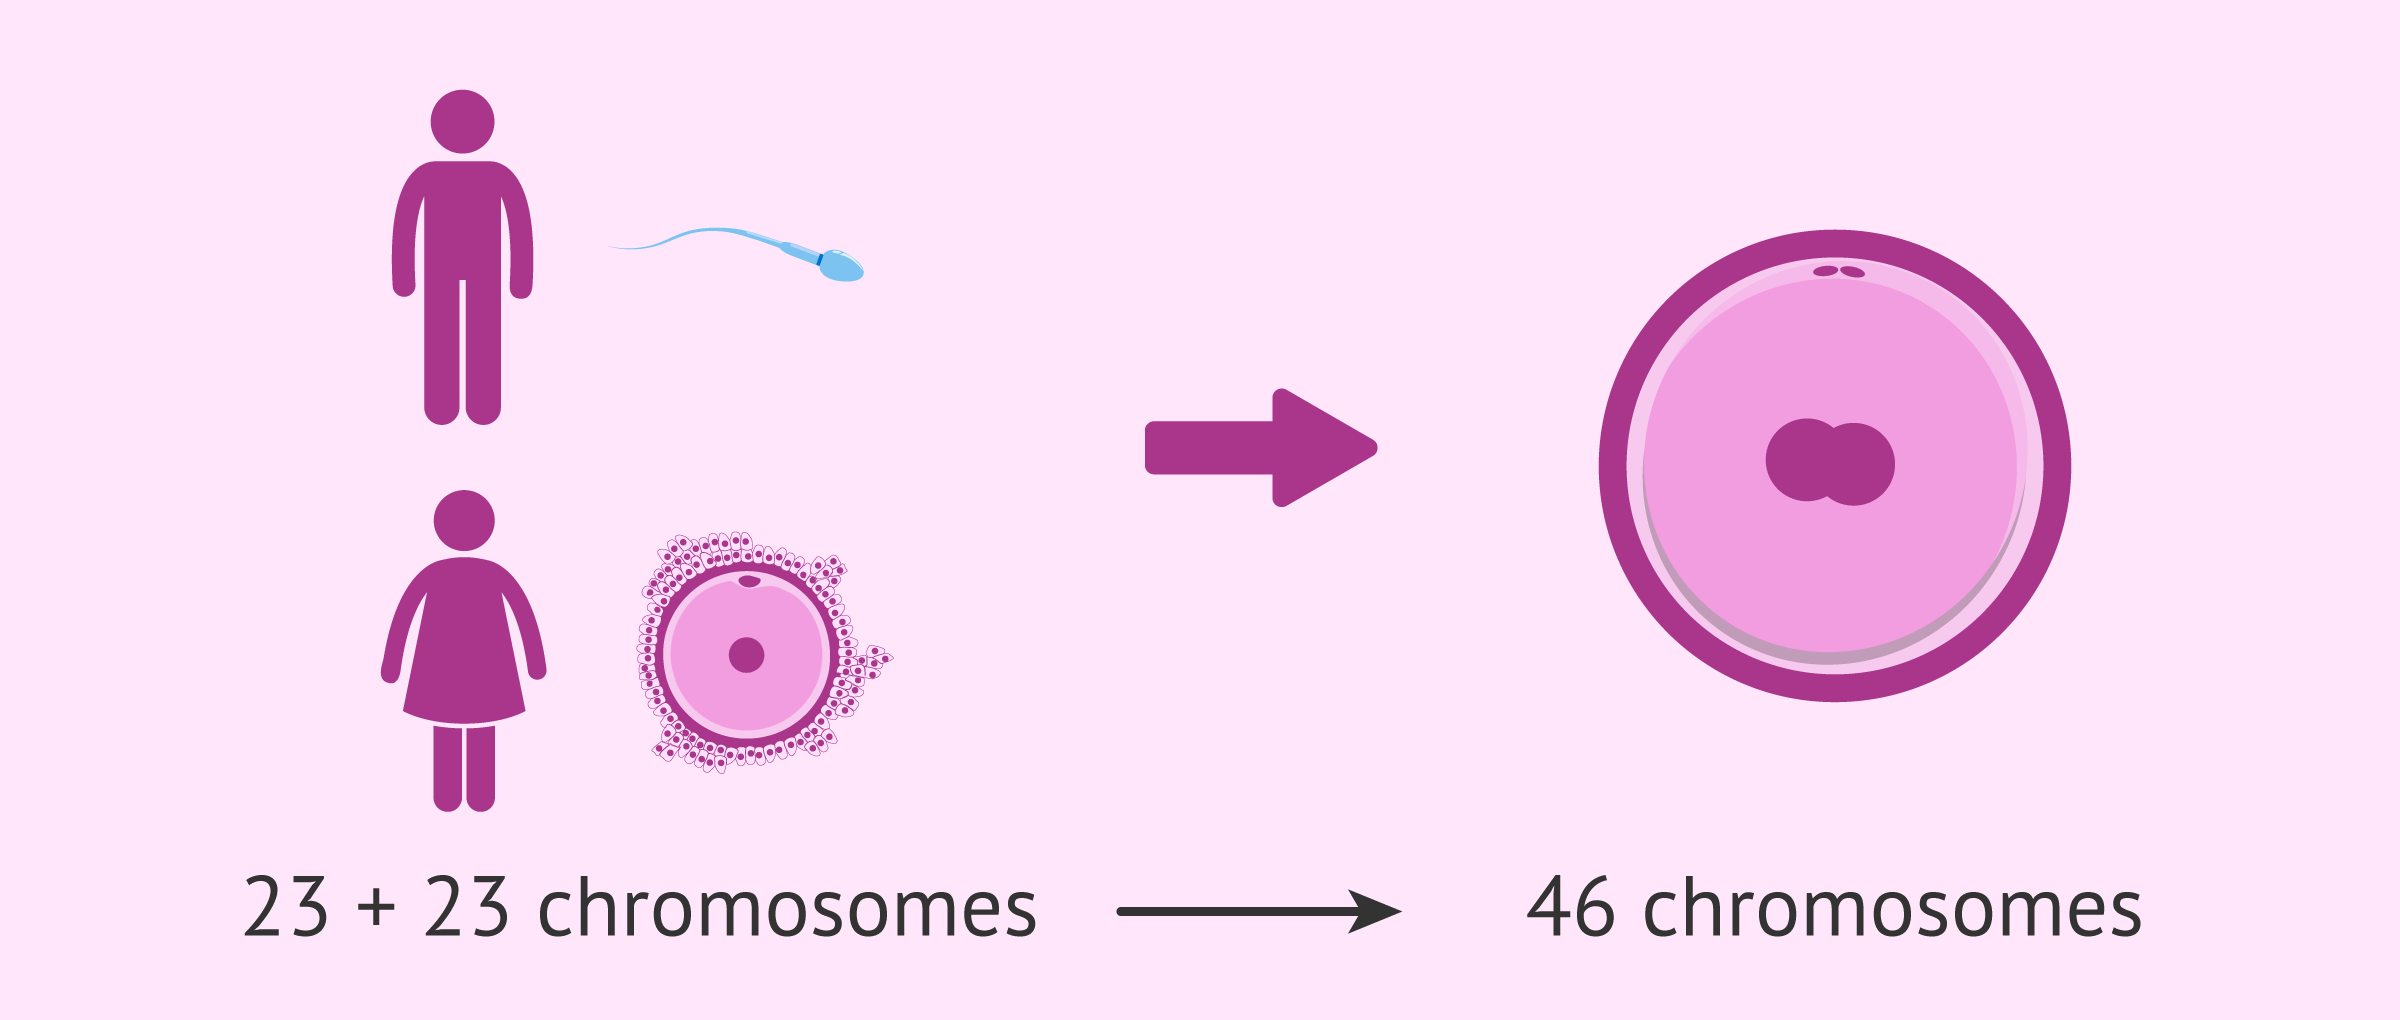 The fertilization of the human egg cell with spermatozoa